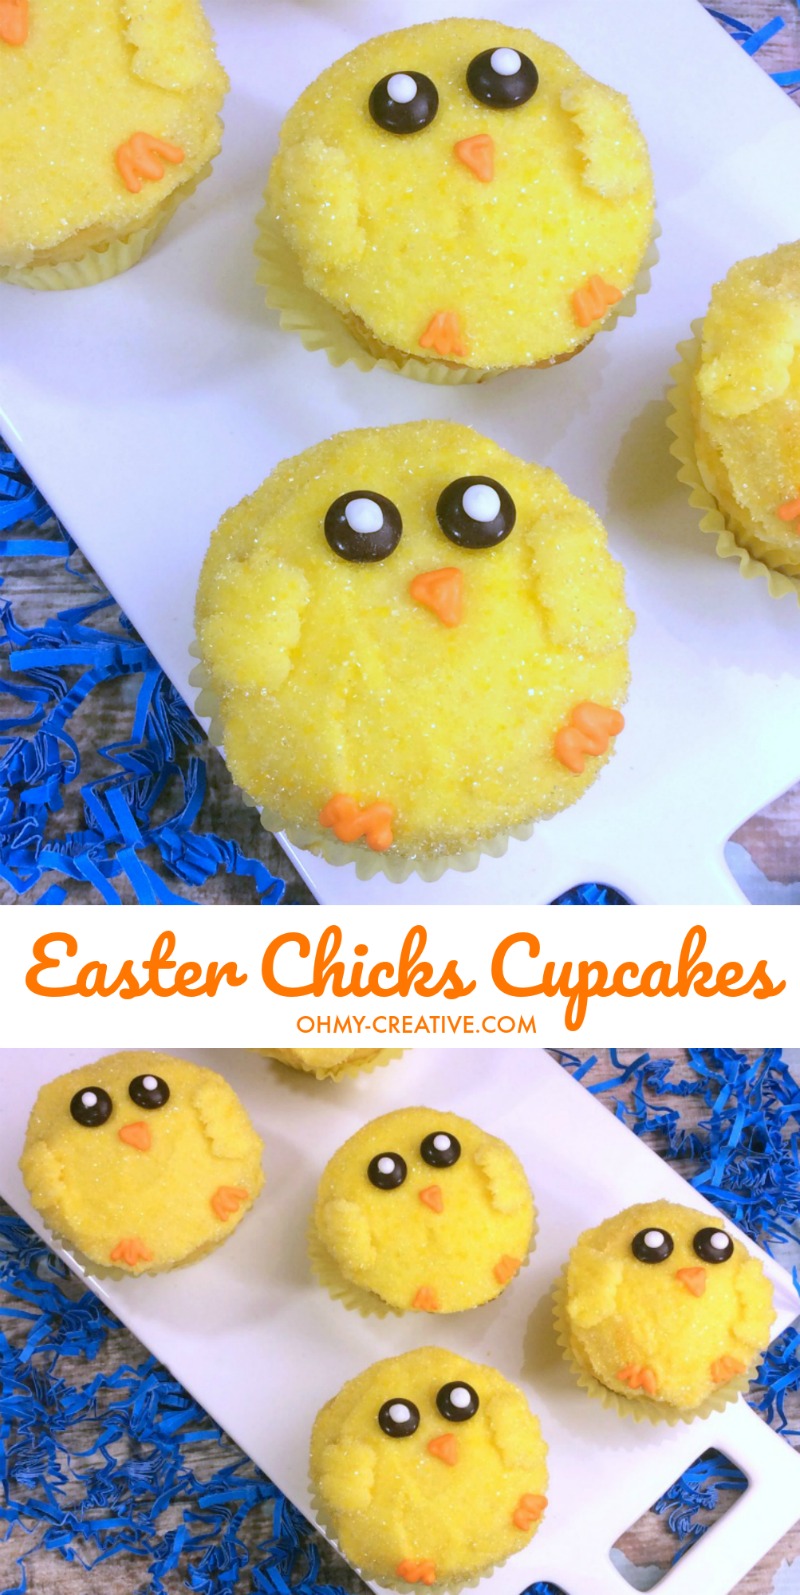 Easter Chicks Cupcakes | OHMY-CREATIVE.COM | Chick Easter cupcakes | Chick Cupcakes | Easter Desserts | Easter Treats #easter #easterdesserts #eastertreats #chickcupcakes #cupcakes